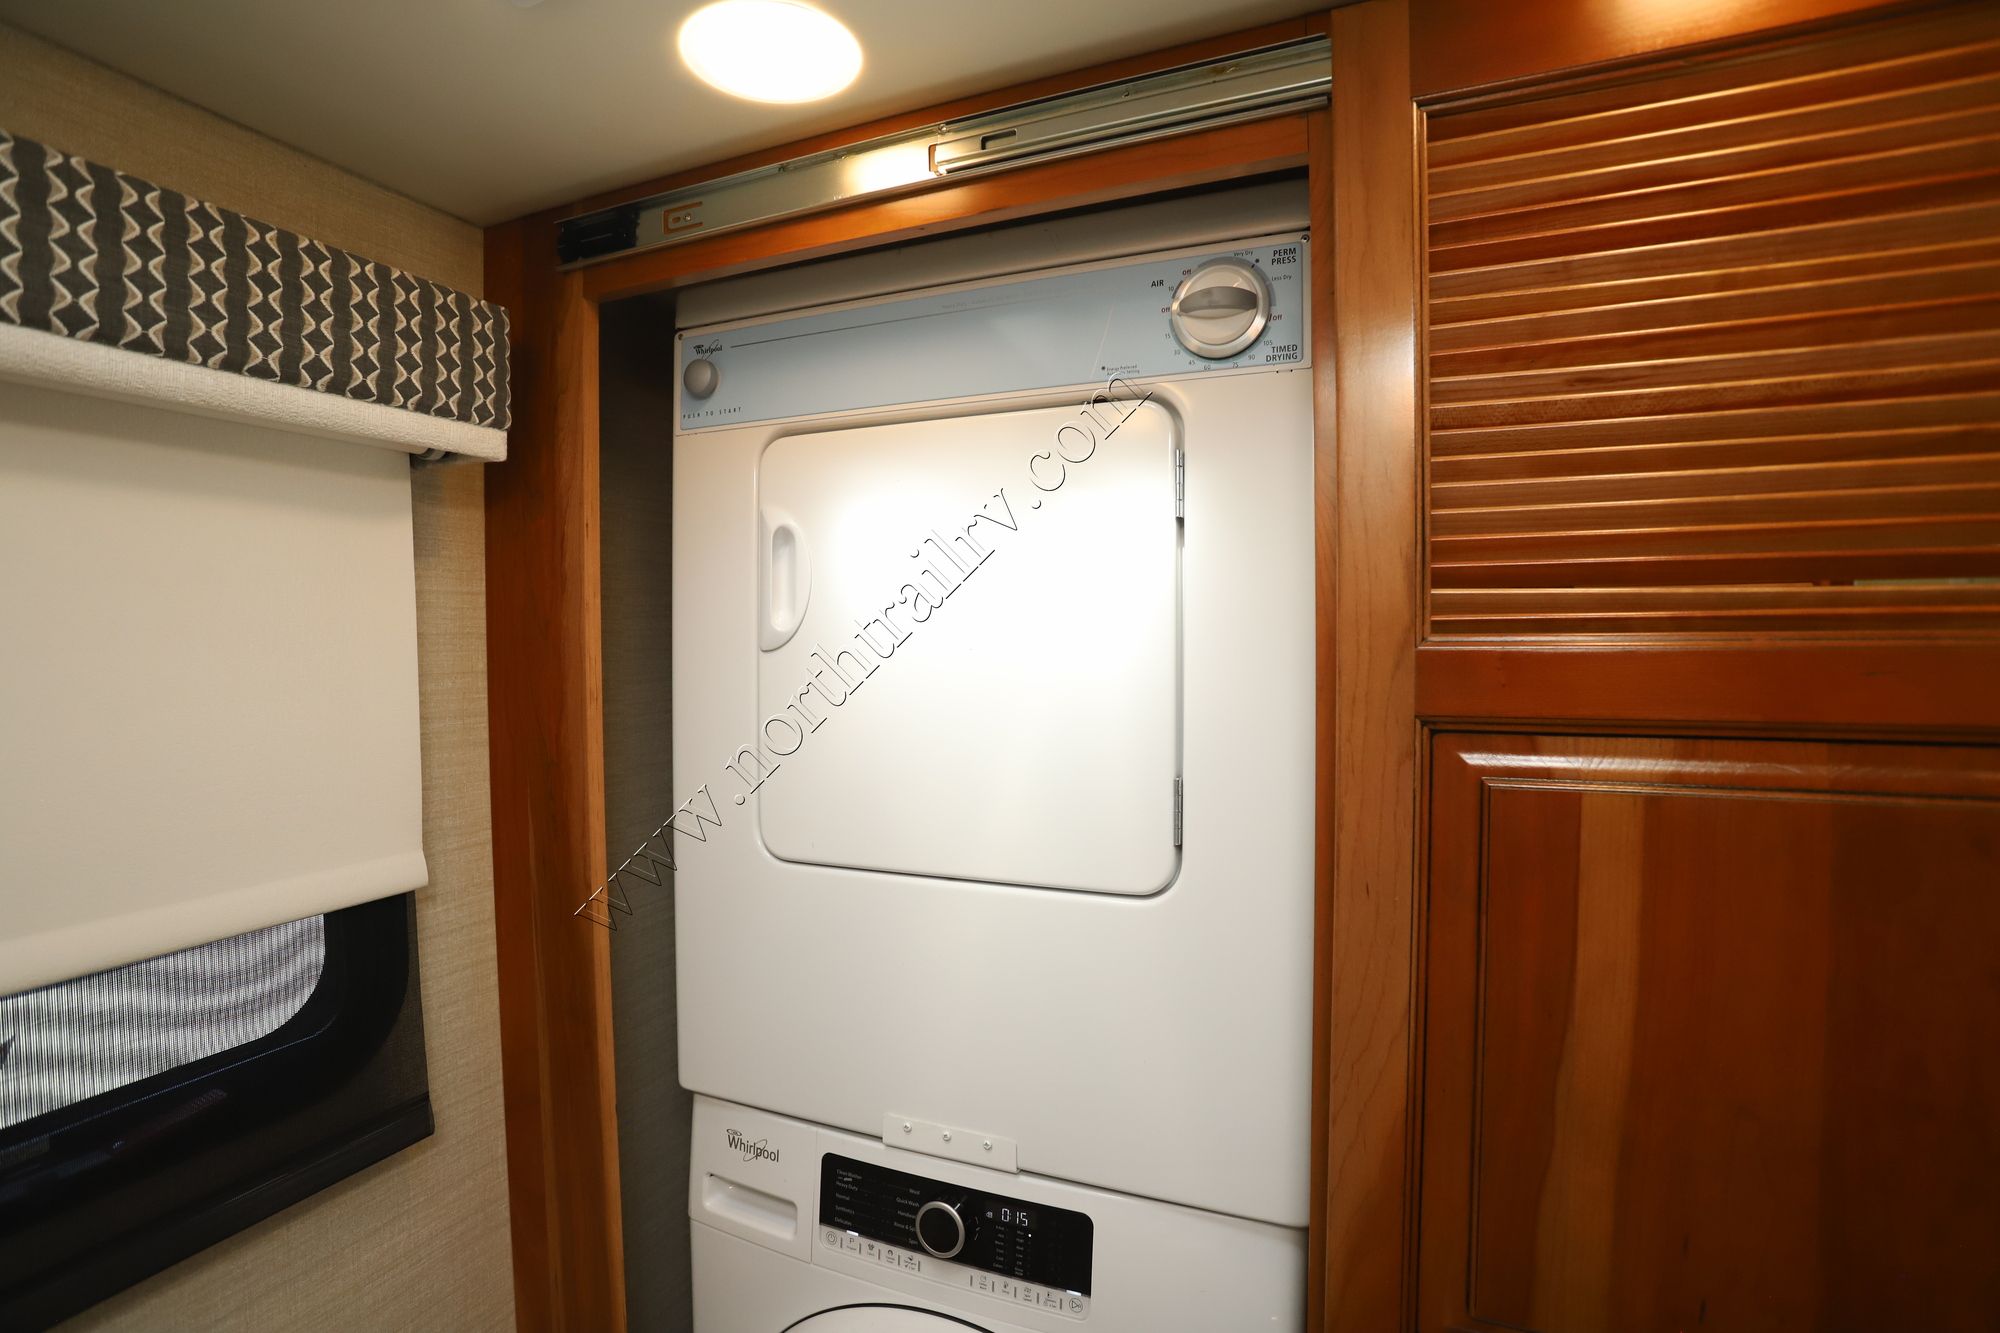 Used 2020 Entegra Reatta 39T2 Class A  For Sale